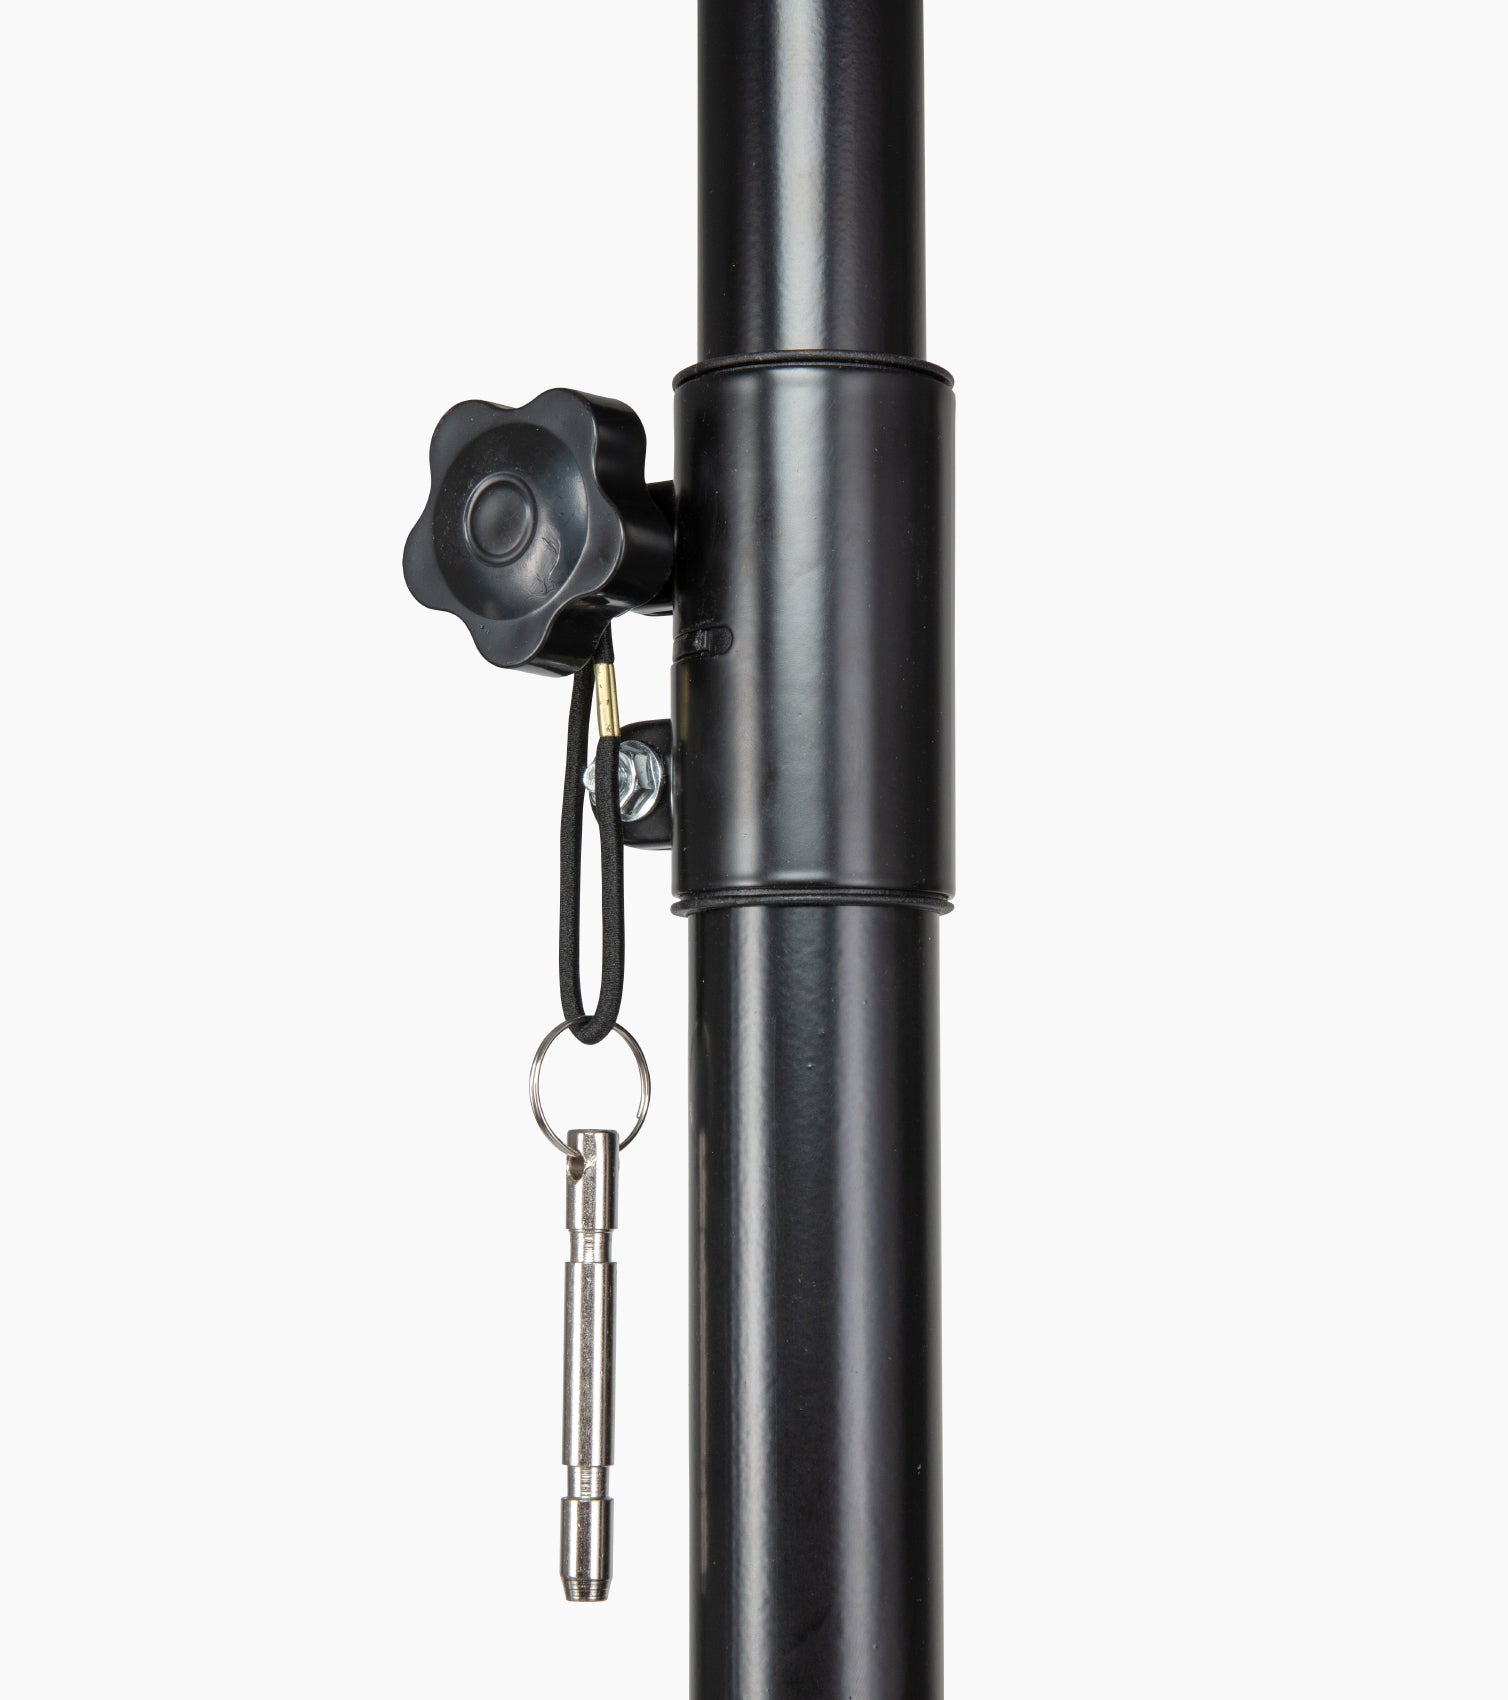 close-up of tripod speaker stand safety pin lock